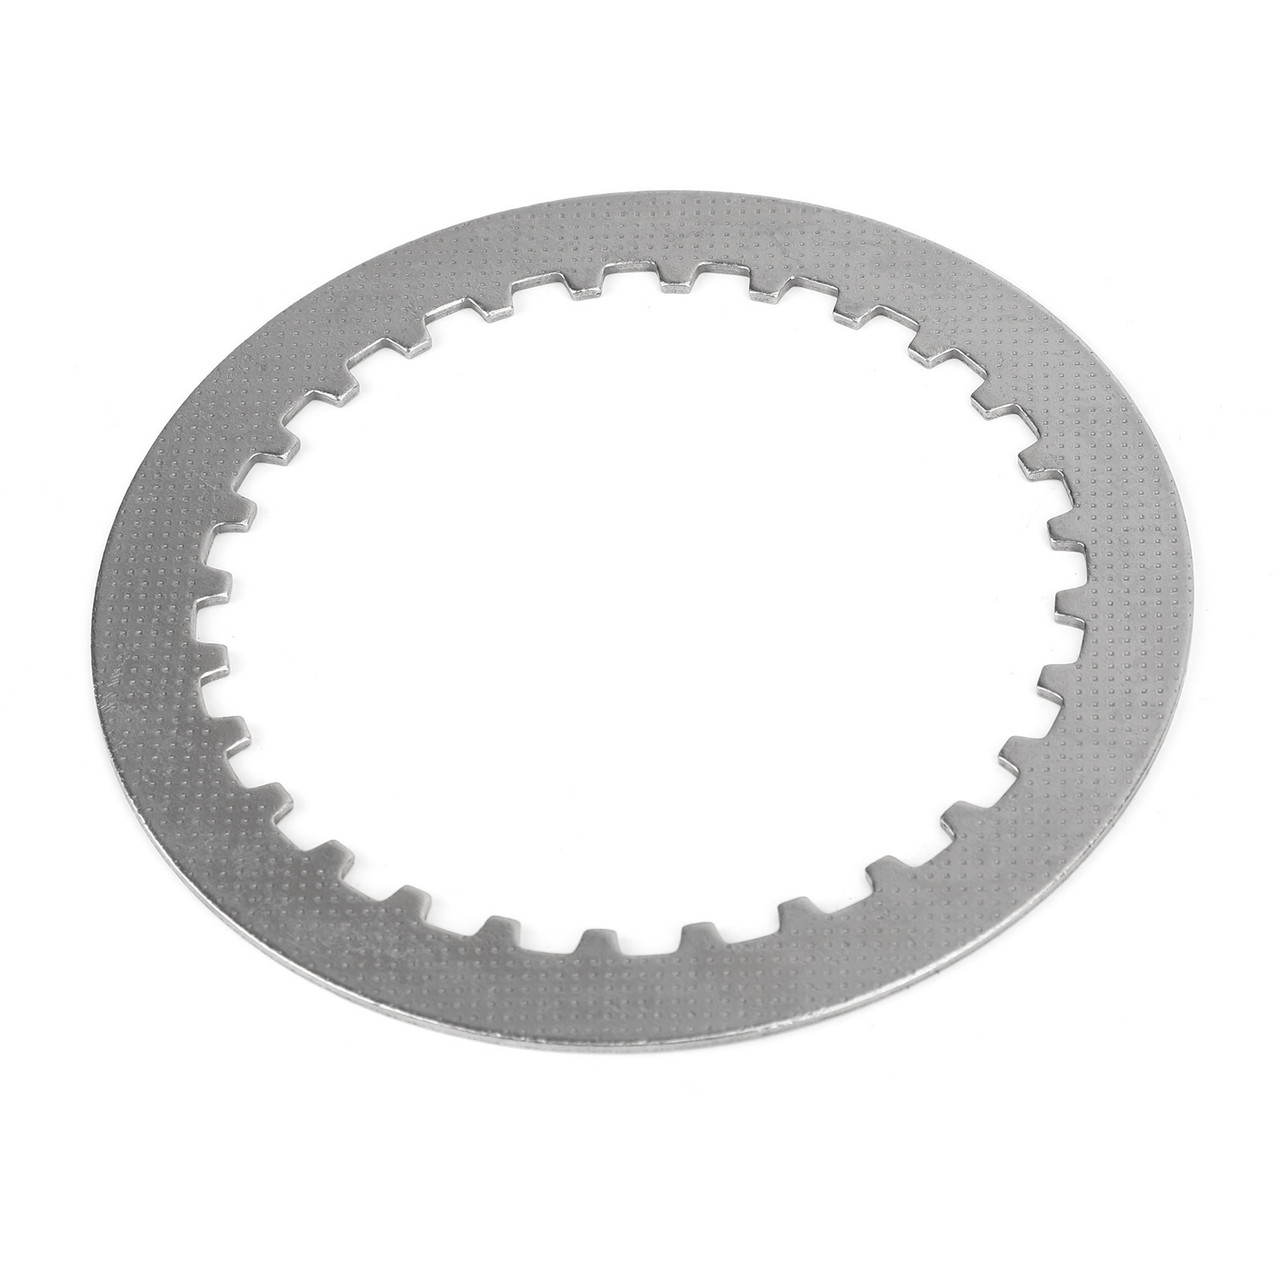 Clutch Plate Kit - Friction & Steel Plates Fit for Honda CB750F Seven Fifty 92-02 CB750 Nighthawk 750 91-03 22201-MT6-601